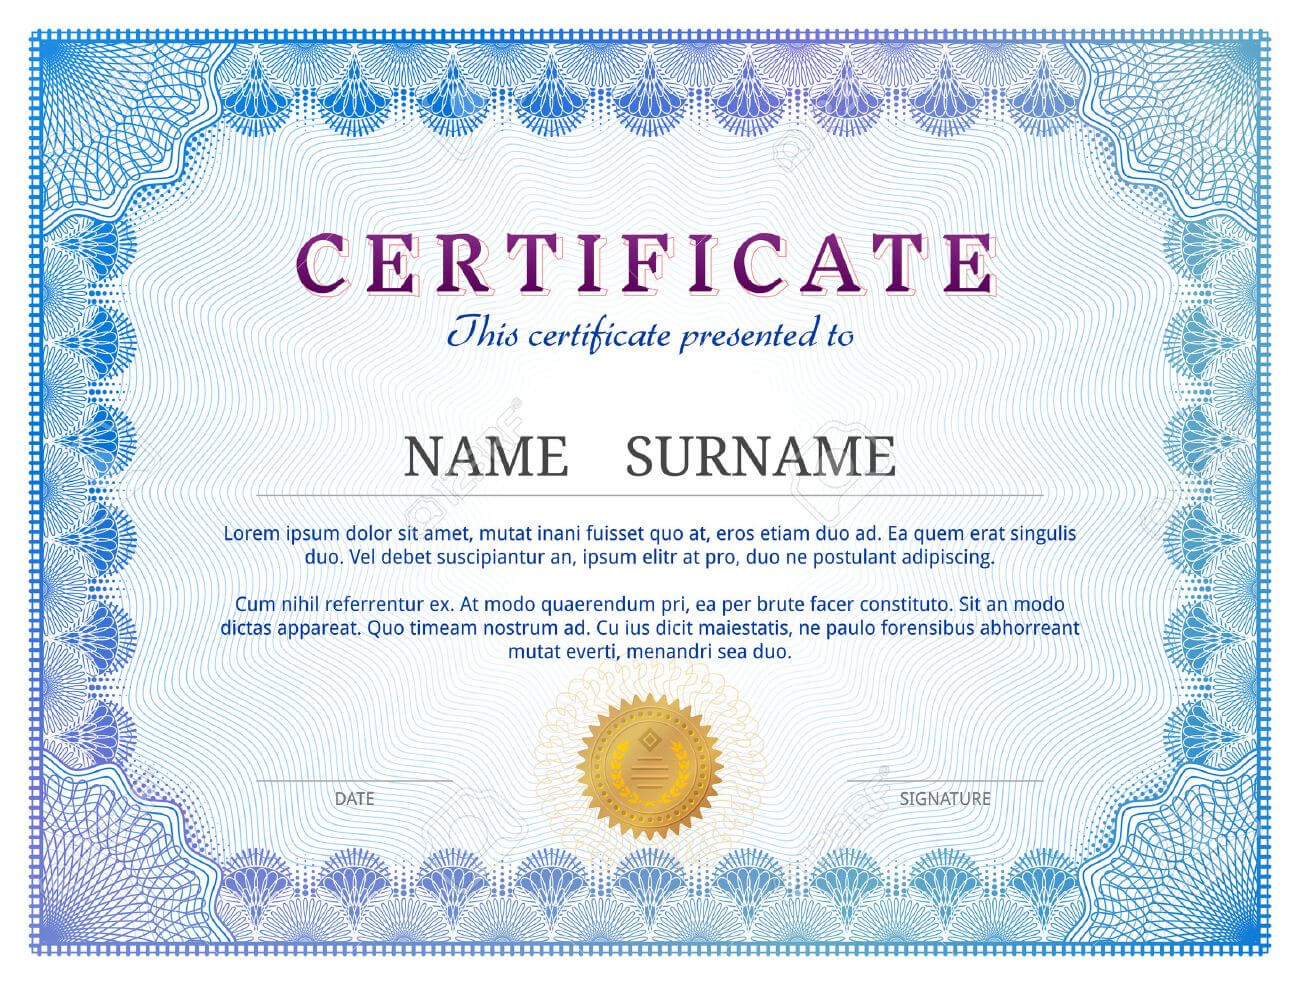 Certificate Template With Guilloche Elements. Blue Diploma Border.. In Validation Certificate Template